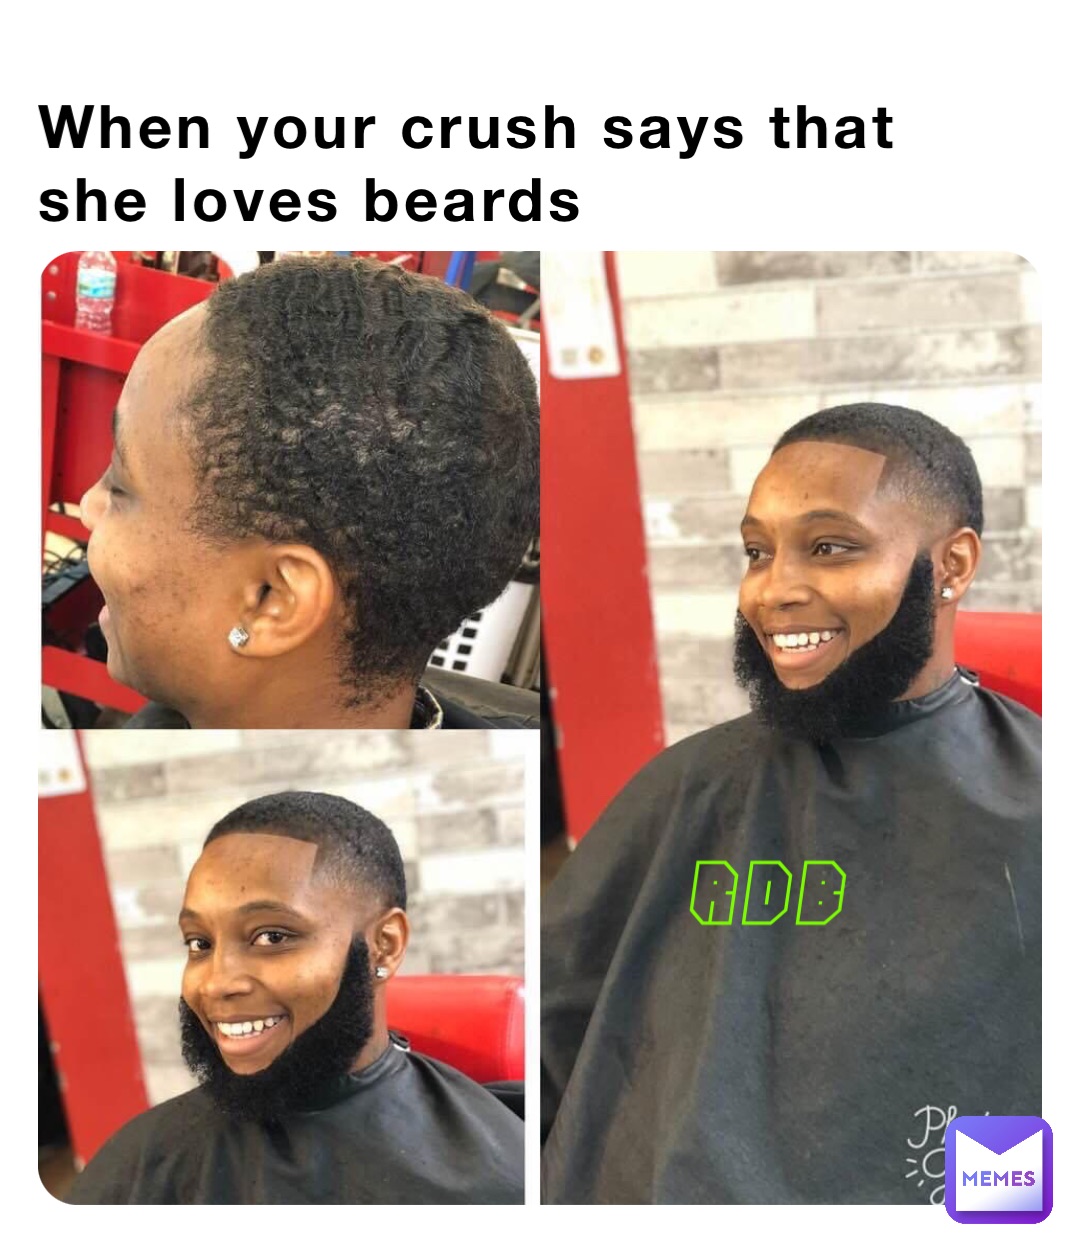 When your crush says that she loves beards RDB